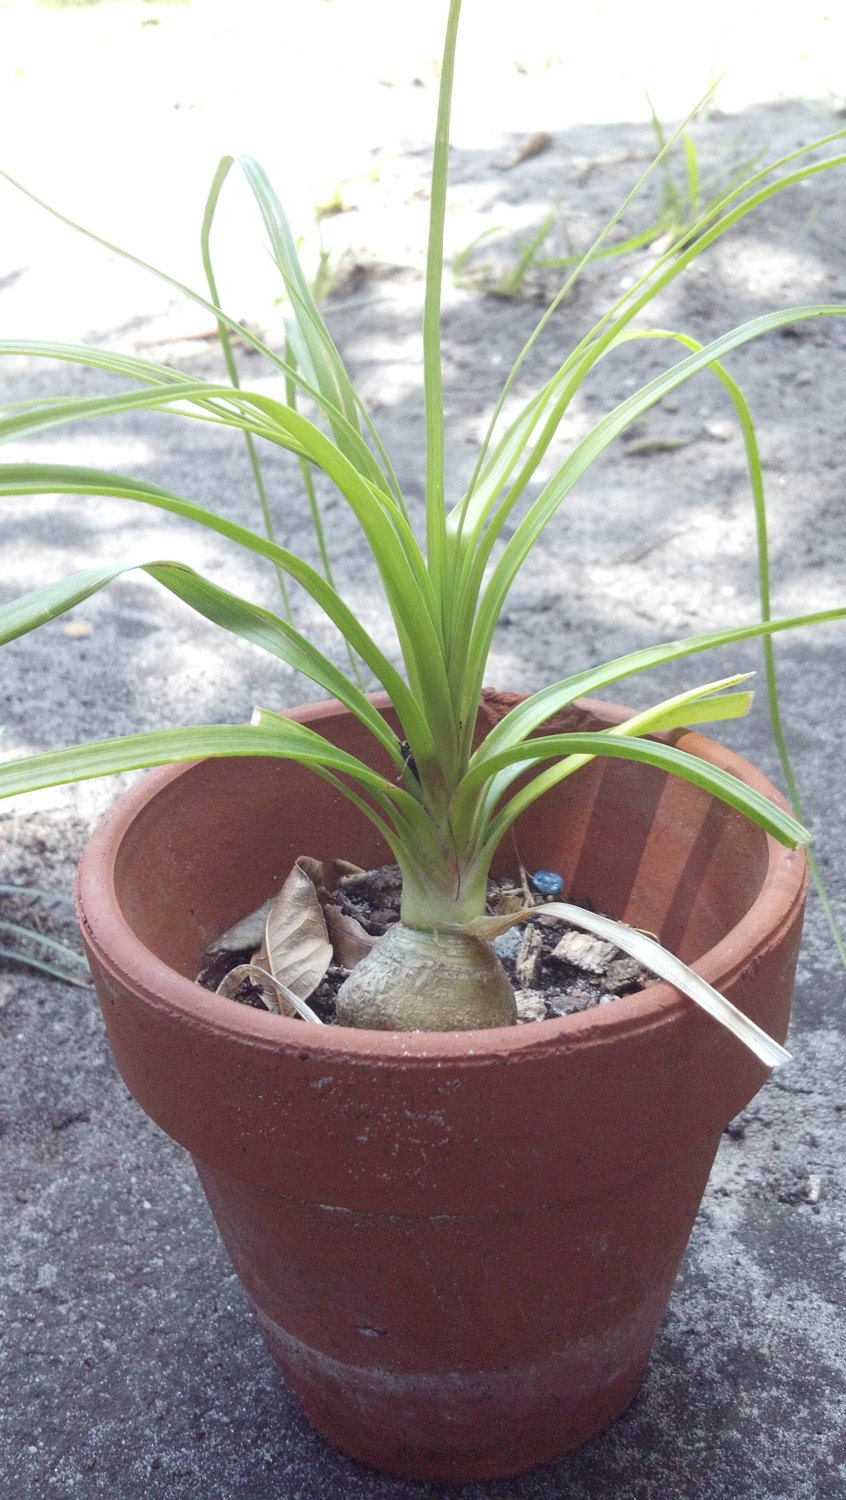 Ponytail Palm Beaucarnea Recurvata Well Rooted Succulent